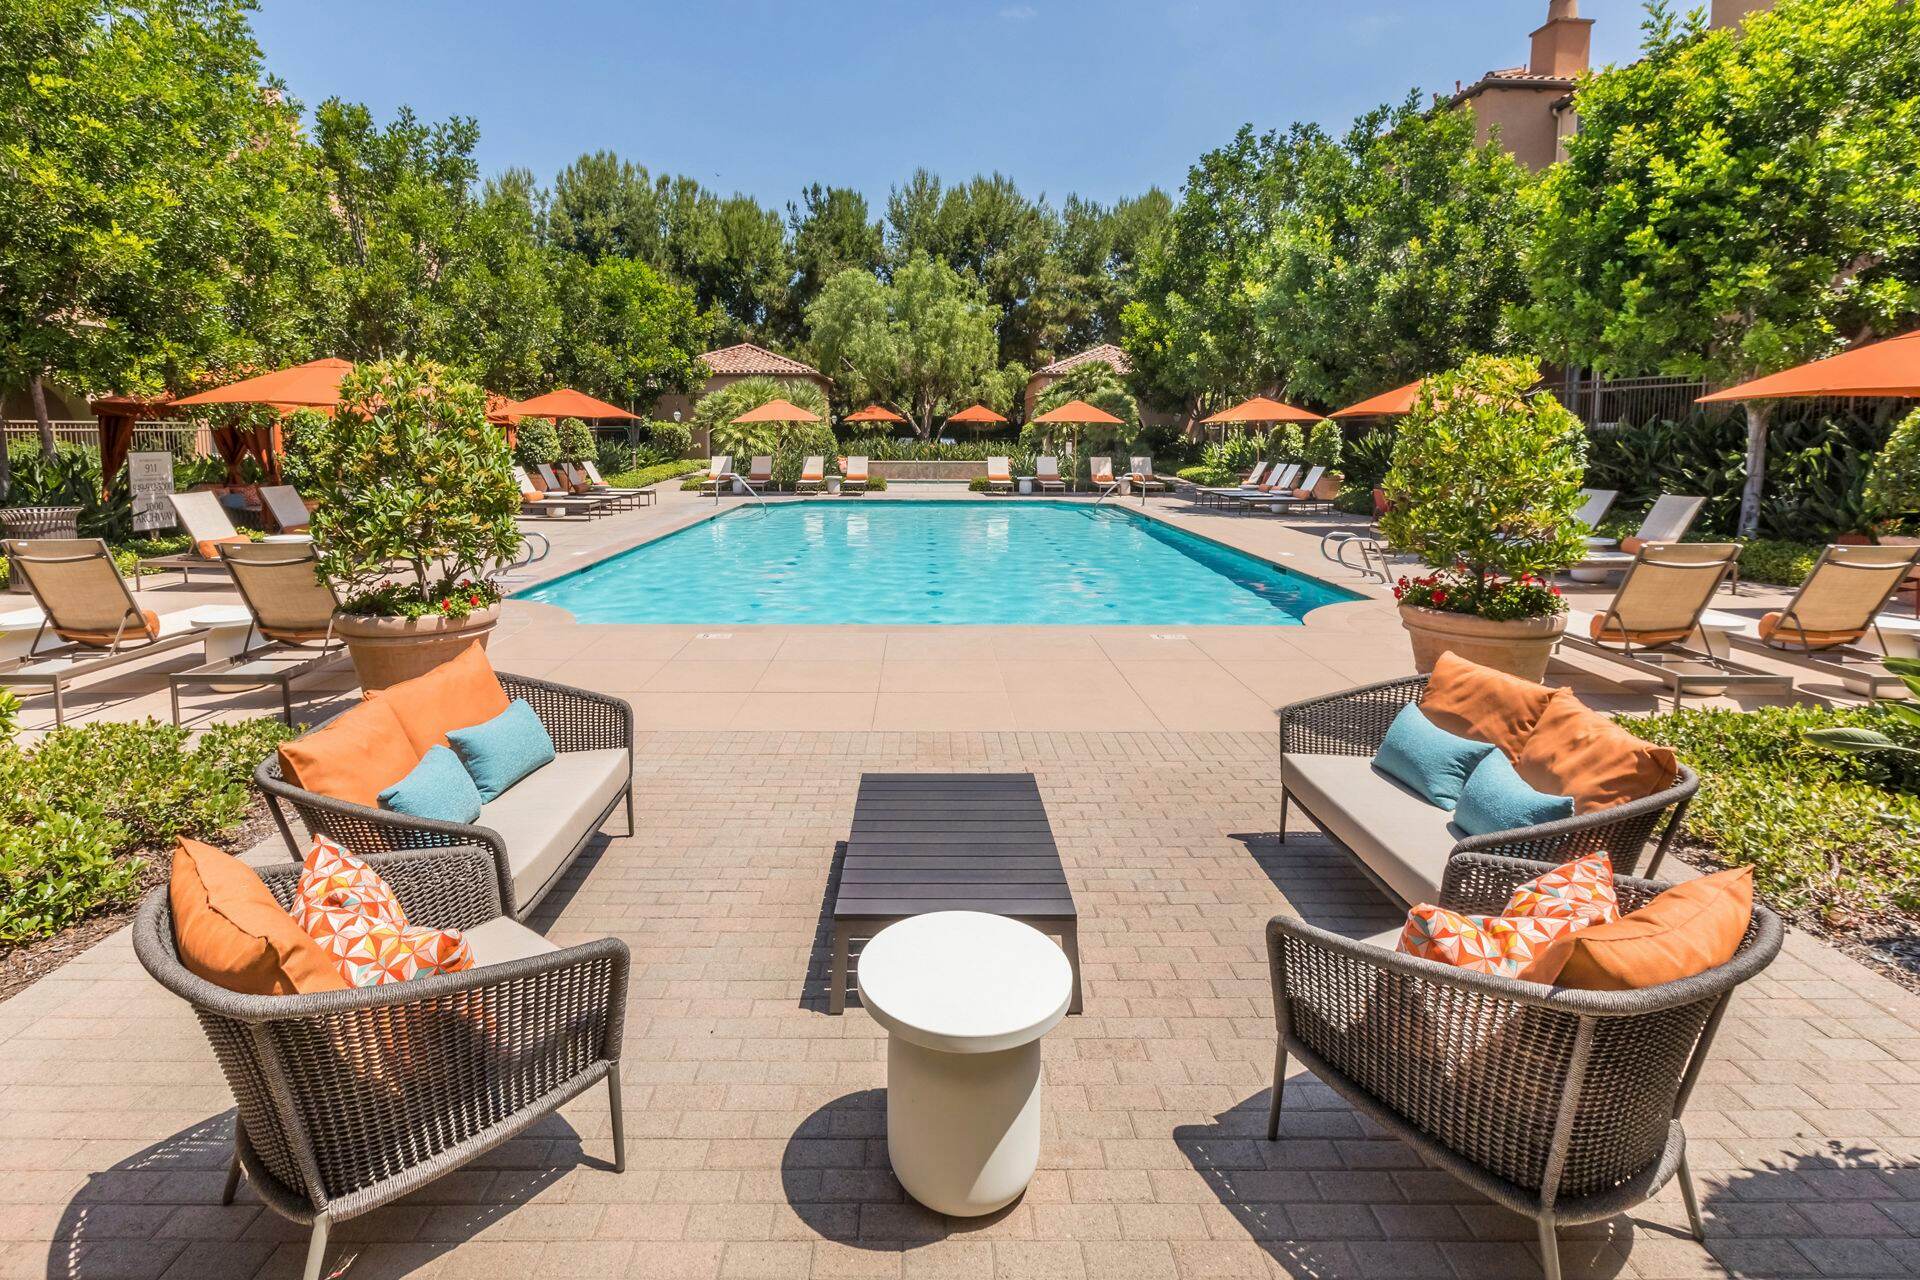 Exterior pool view at Portola Place Apartment Homes in Irvine, CA.